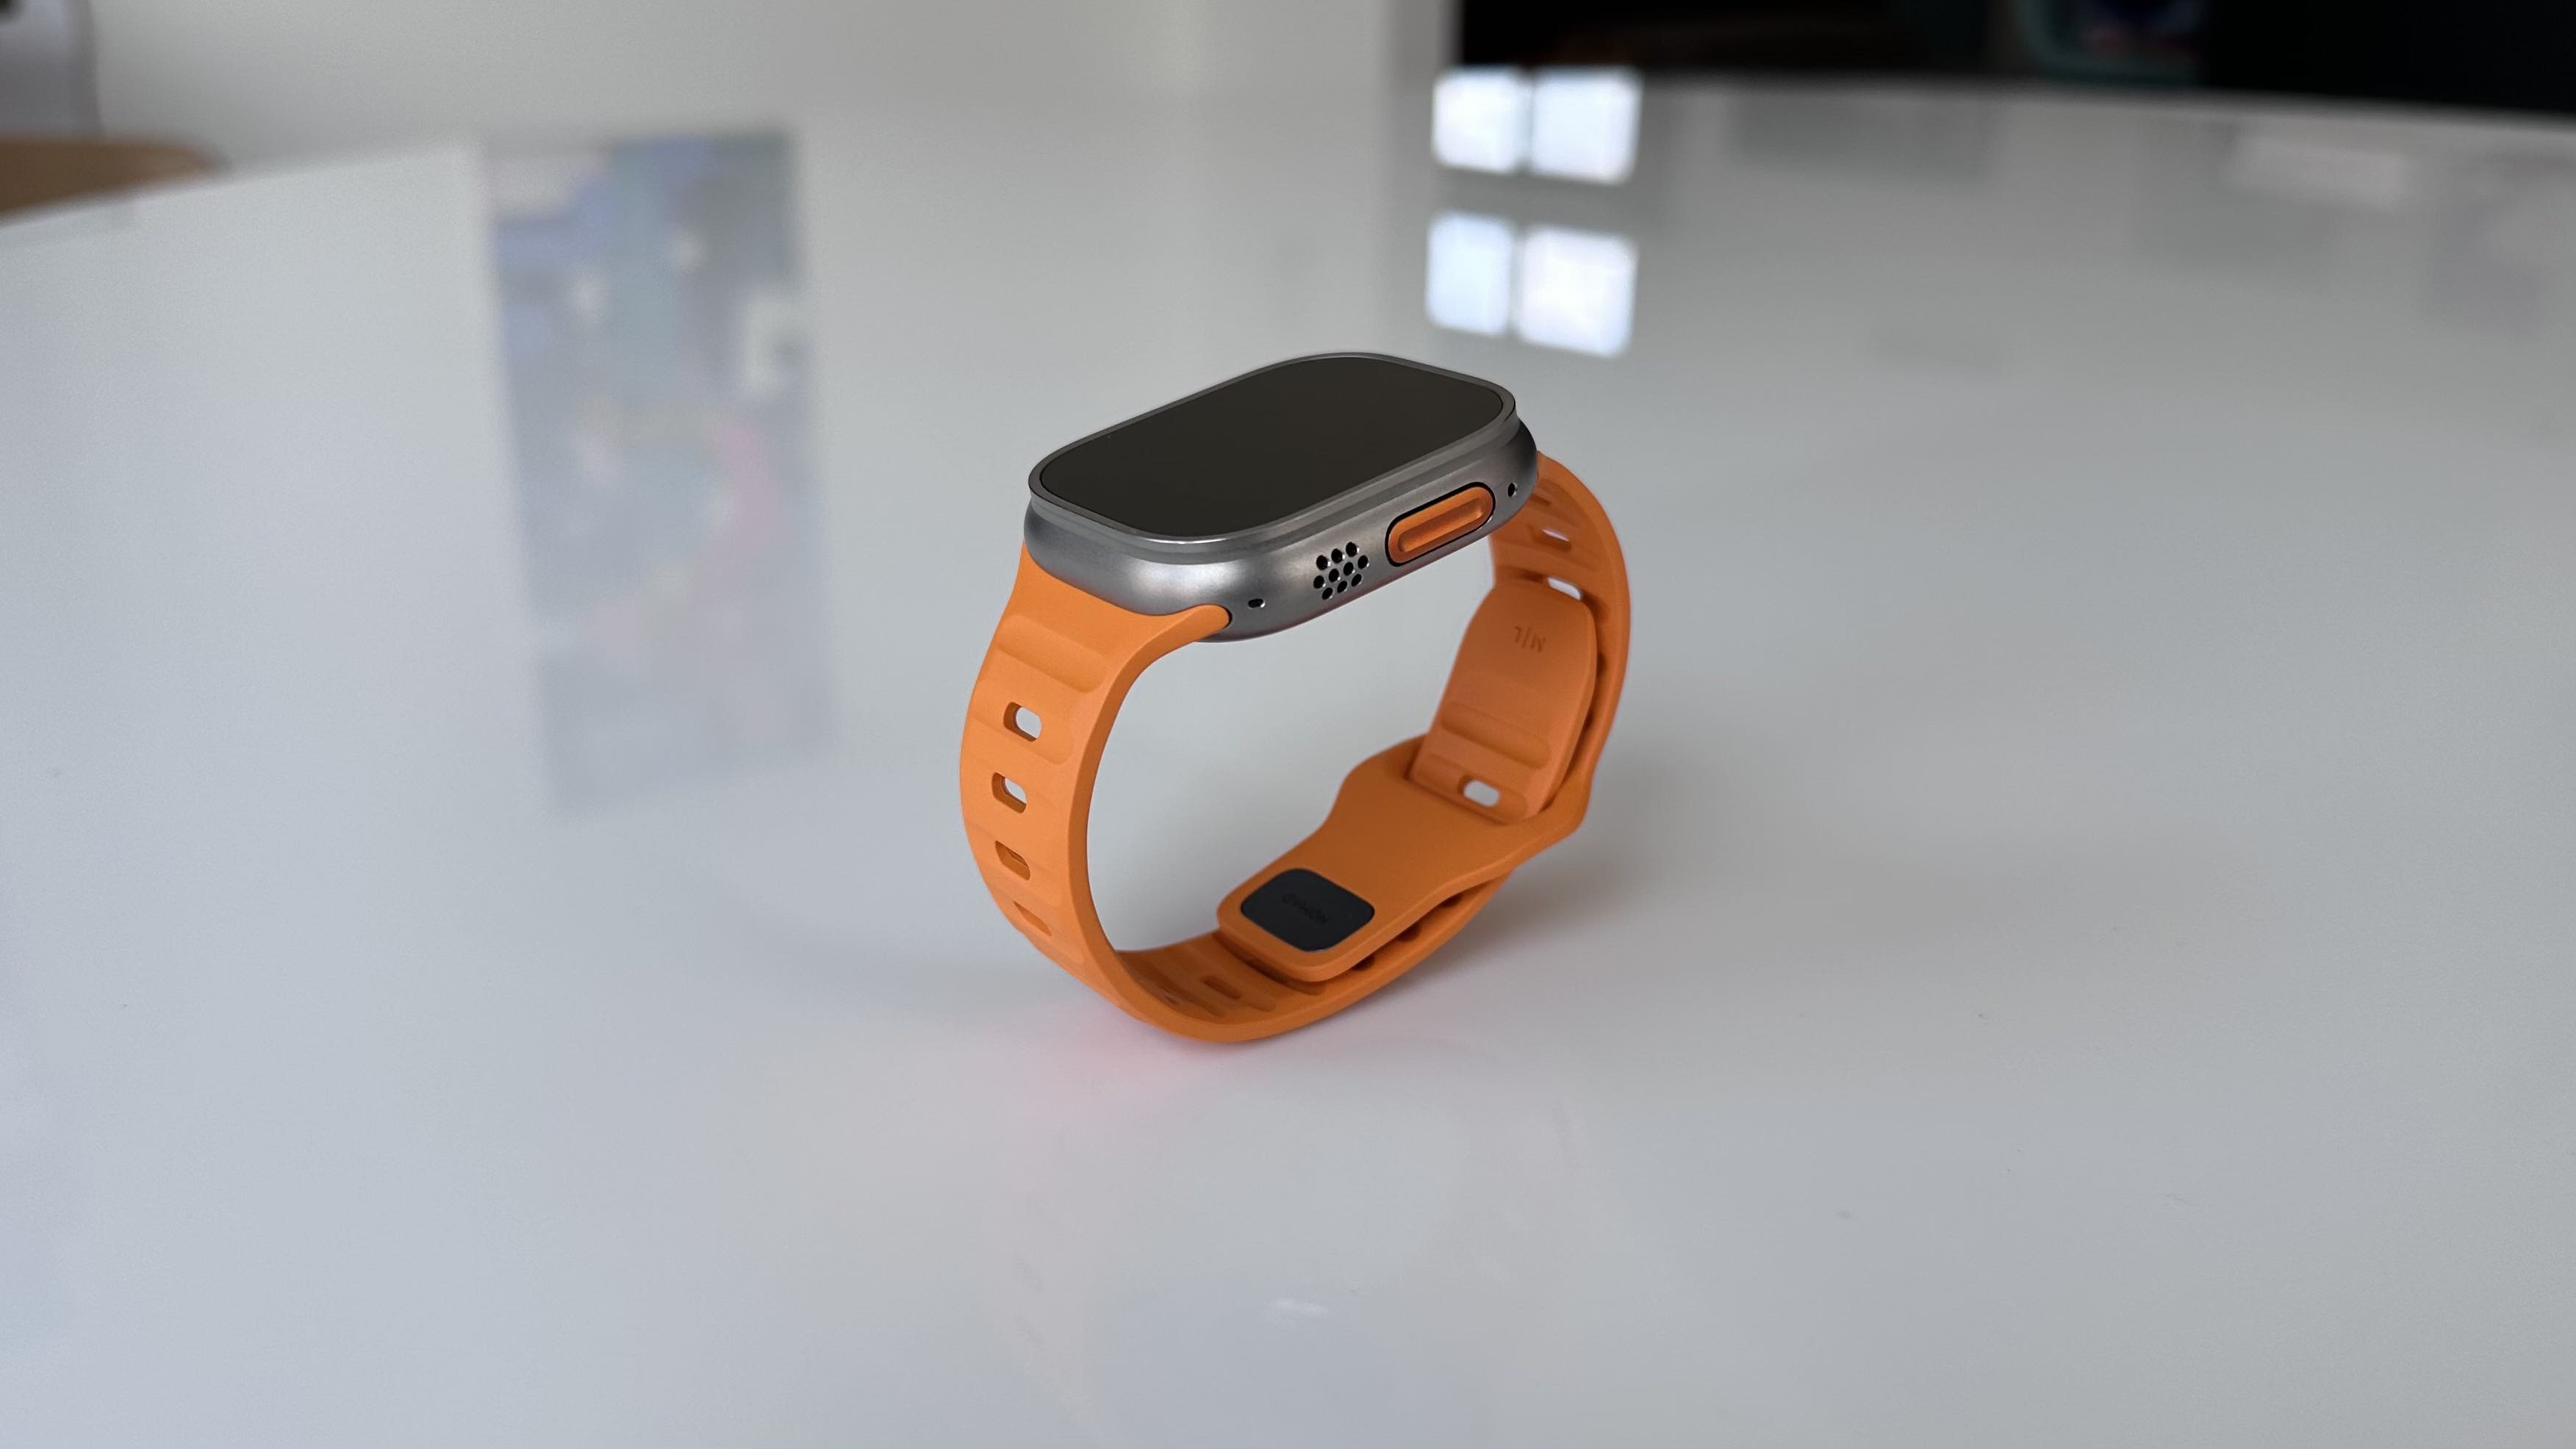 Fitbit Blaze announced: a cool fitness watch | Mobile Fun Blog